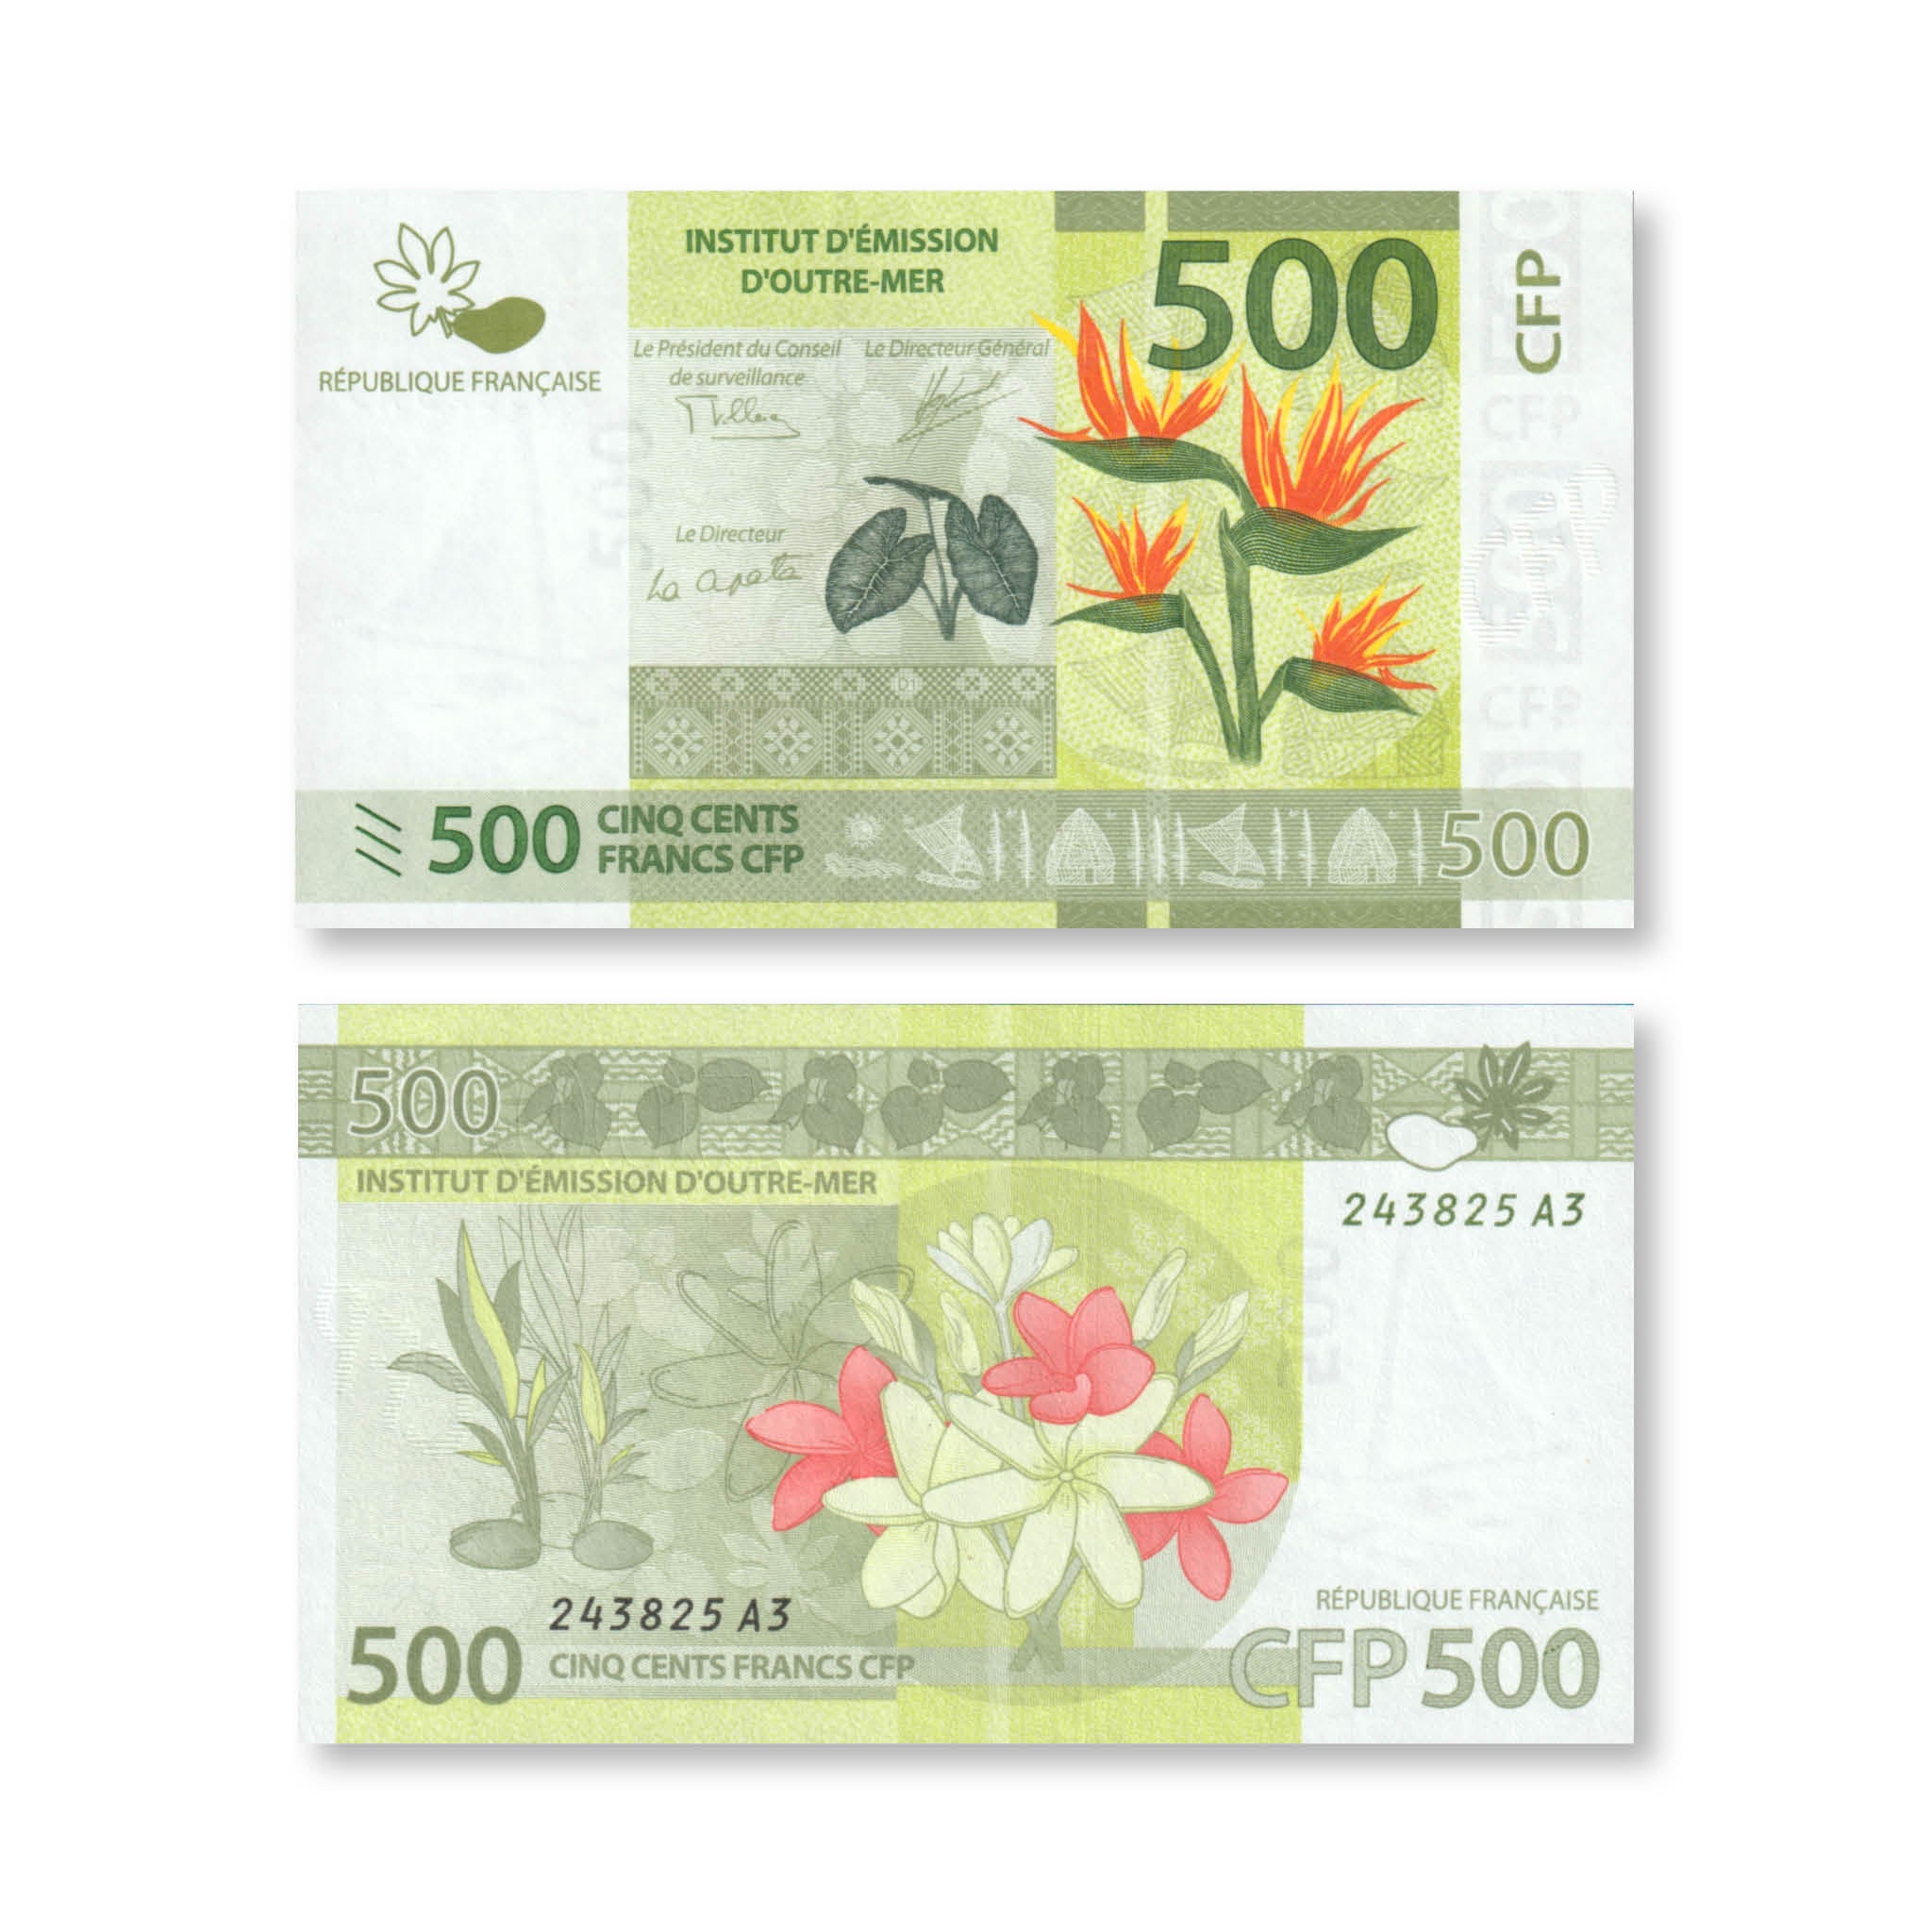 French Pacific Territories 500 Francs, 2014, B105b, P5, UNC - Robert's World Money - World Banknotes